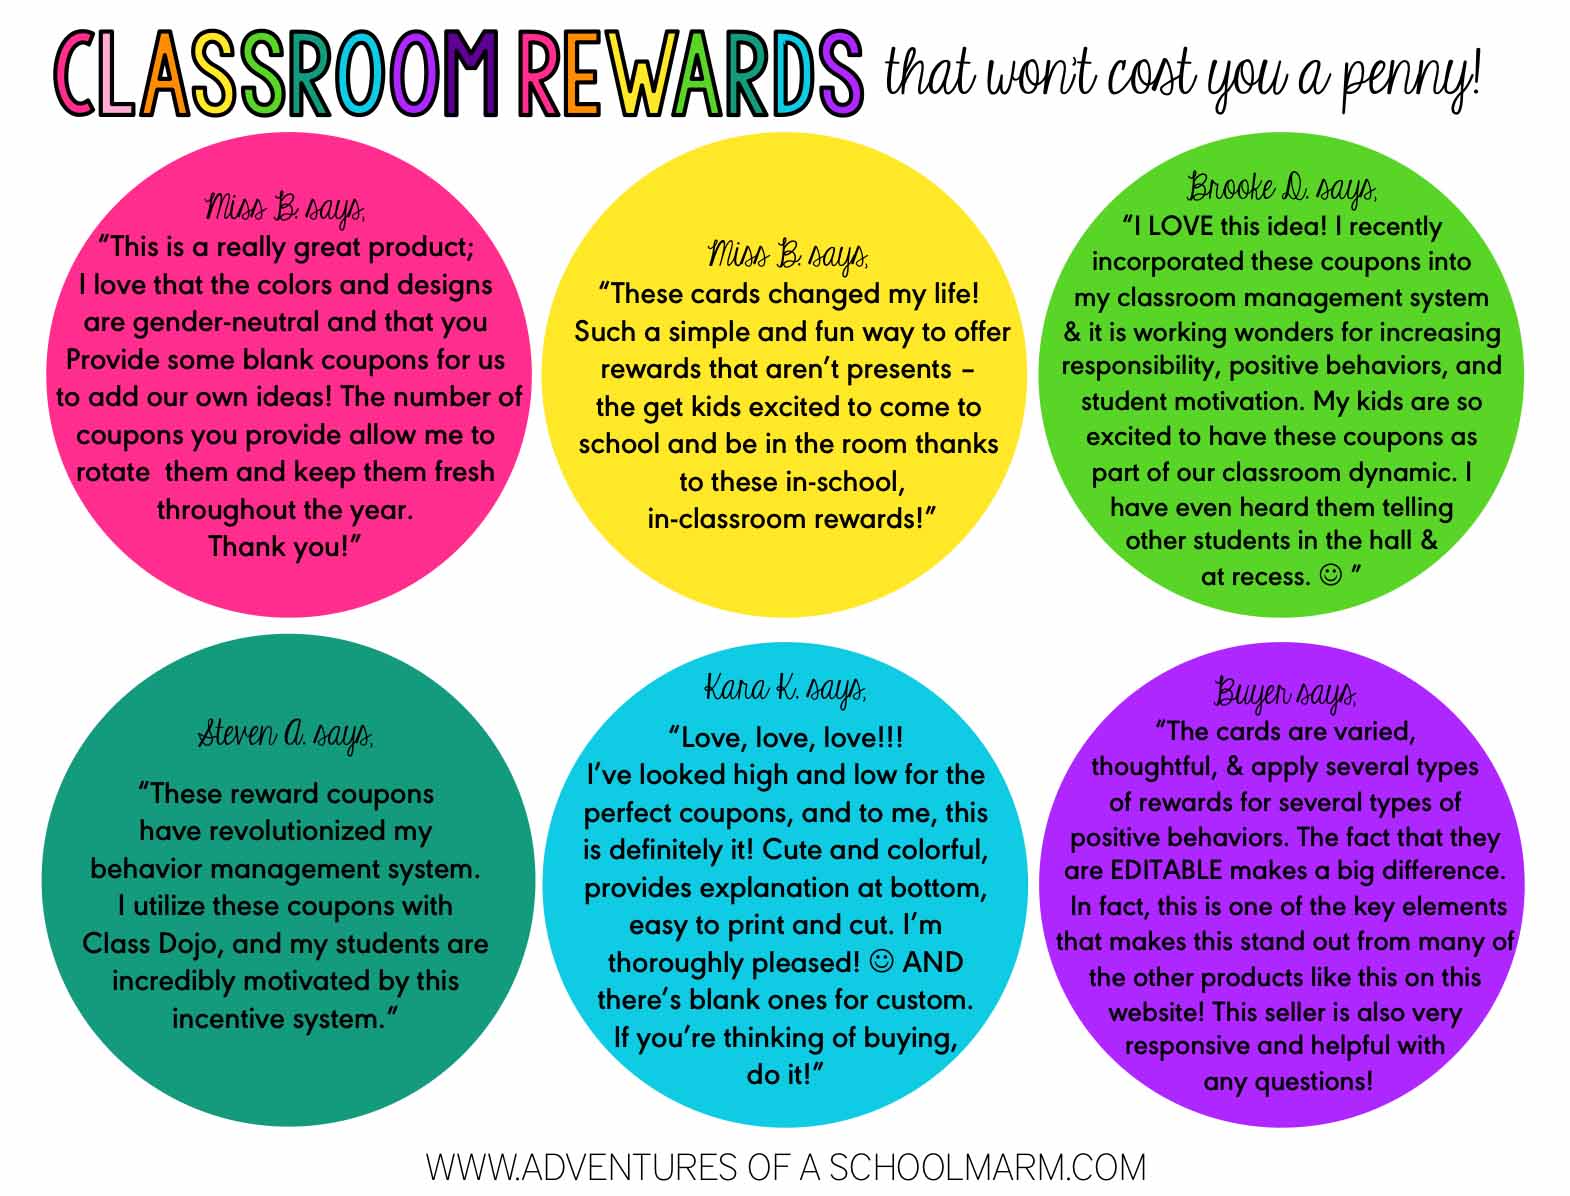 Your students will love these 40 unique reward coupons, and you will love how much money it saves you! These reward coupons focus on rewarding students with privileges that make them feel special, increasing intrinsic motivation and making your classroom run much more smoothly. New and improved to be completely editable so you can customize for your own needs!